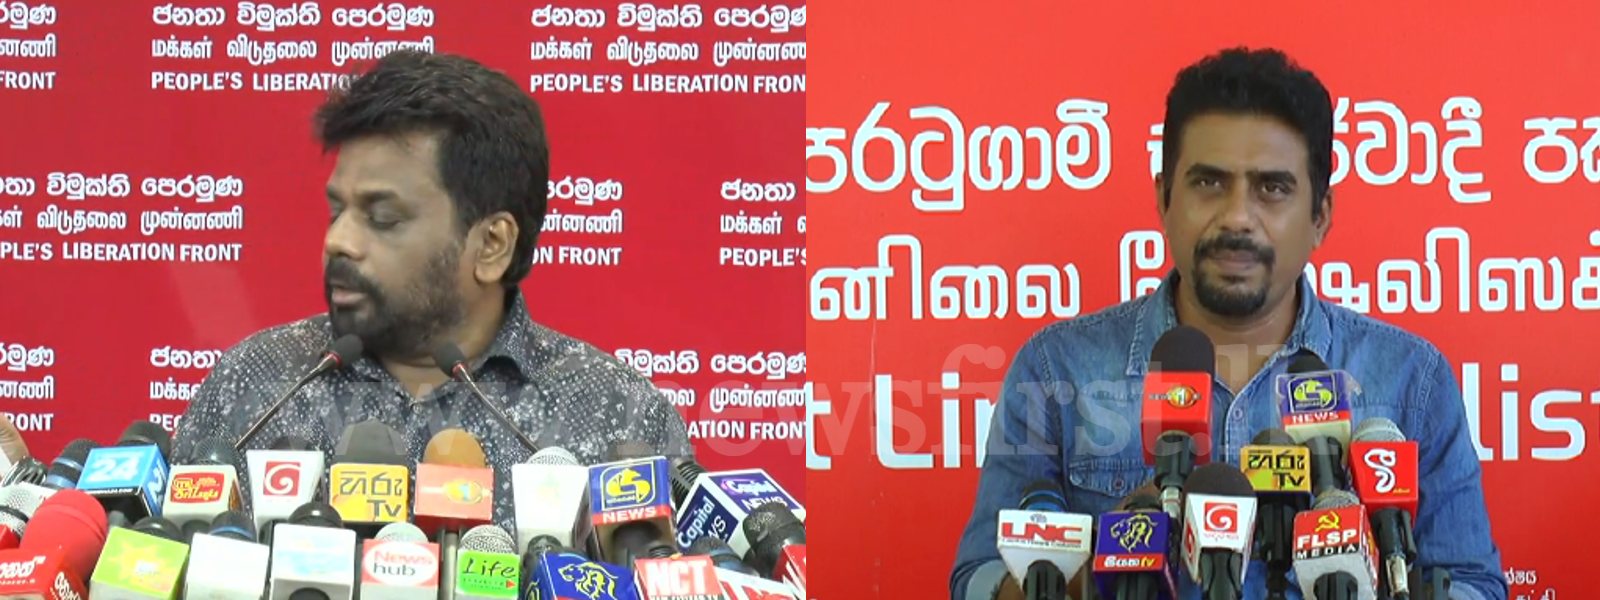 JVP & FSP condemn efforts to stifle protests